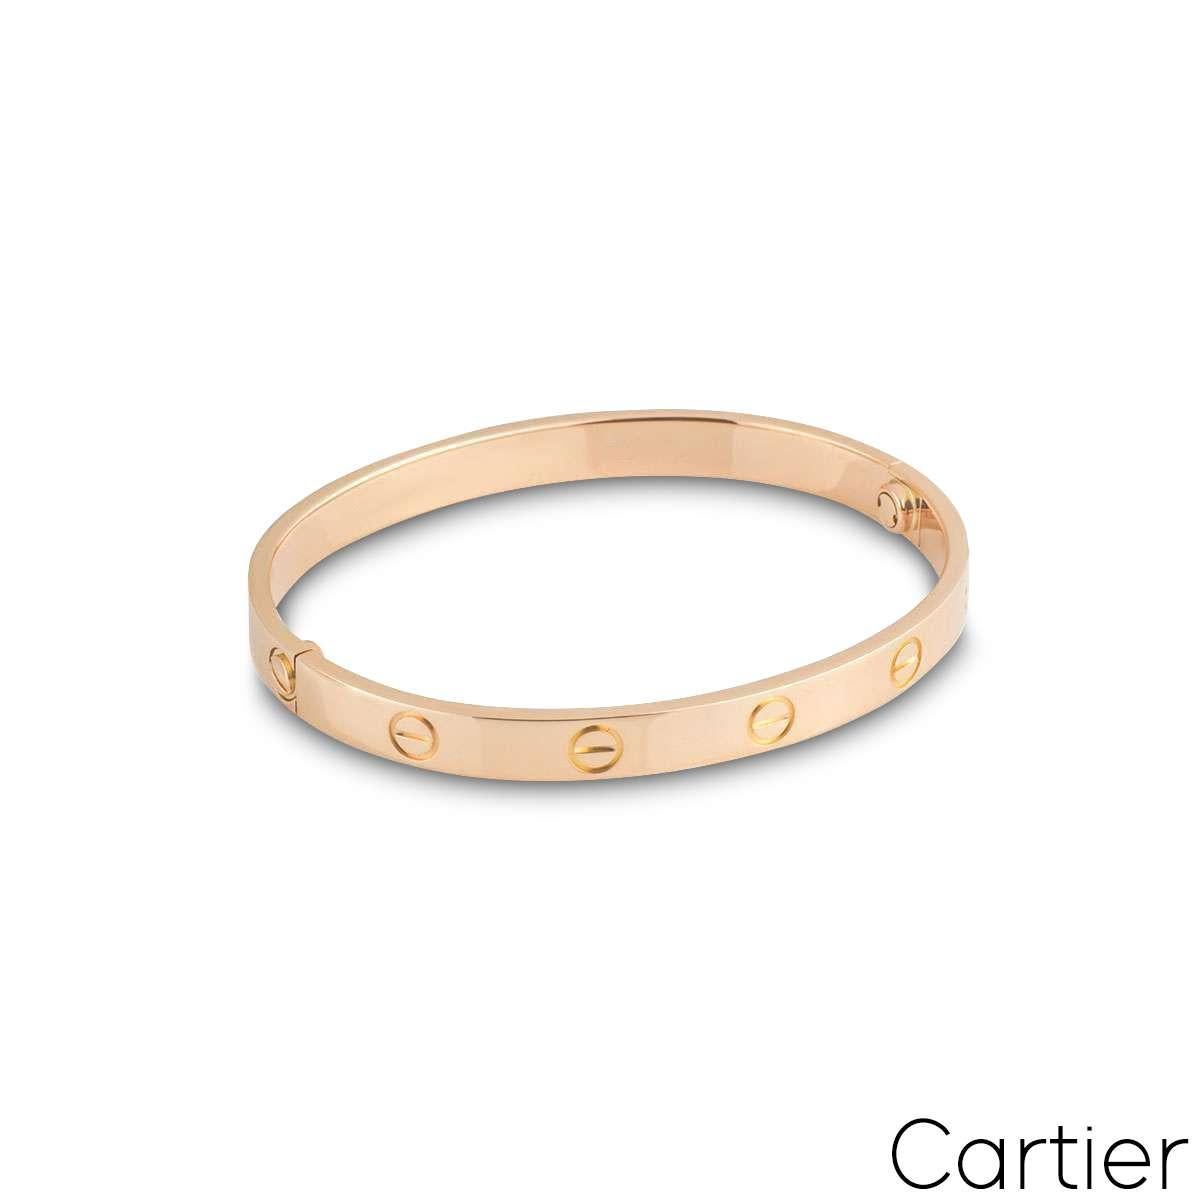 A signature Cartier bracelet, in 18k rose gold from the Love collection. The bracelet comprises of the iconic screw motif design on the outer edge. This bracelet is a size 18, features the new style screw system and has a gross weight of 32.22